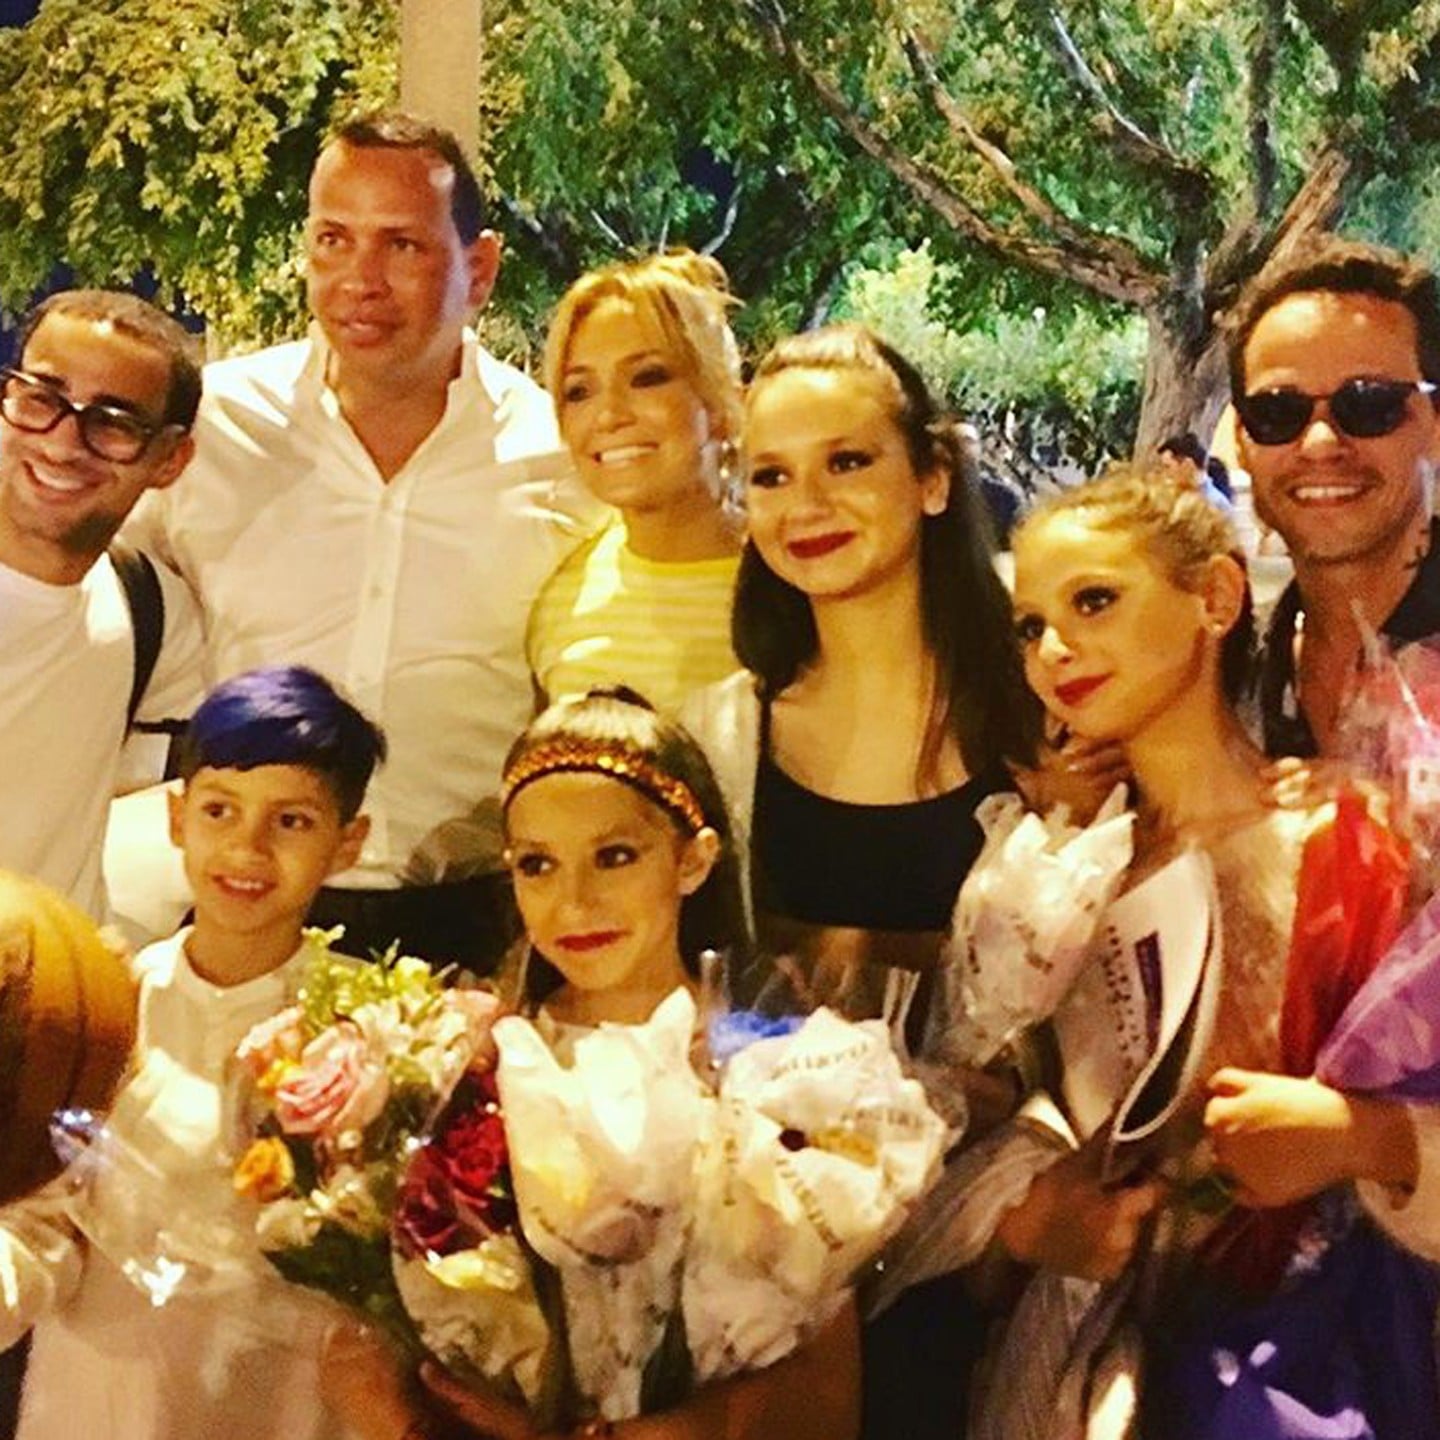 Jennifer Lopez and Alex Rodriguez share new beautiful family picture